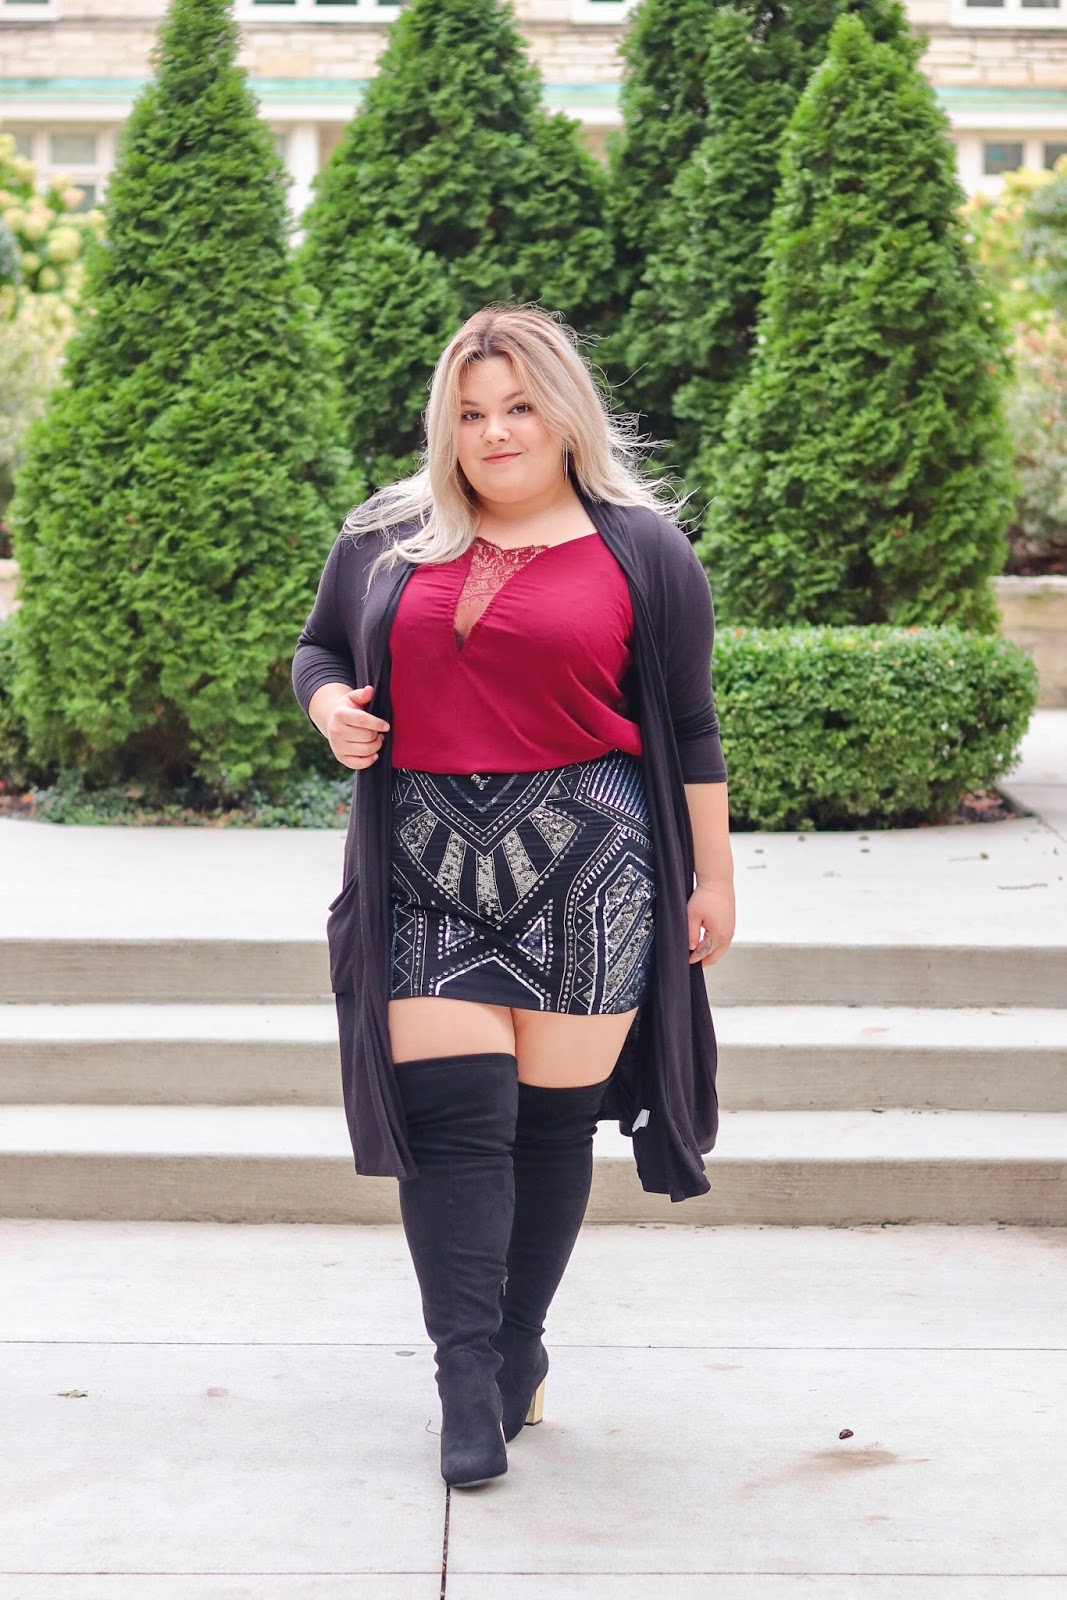 wide calf boots, wide calf knee high boots, natalie in the city, plus size holiday looks, oversized cardigans, plus size affordable clothes, curvy fashion, curves and confidence, torrid, blogger review, lace tank tops, sequin skirts, sequins for fall 2017, Chicago blogger, Chicago fashion, plus size fashion blogger